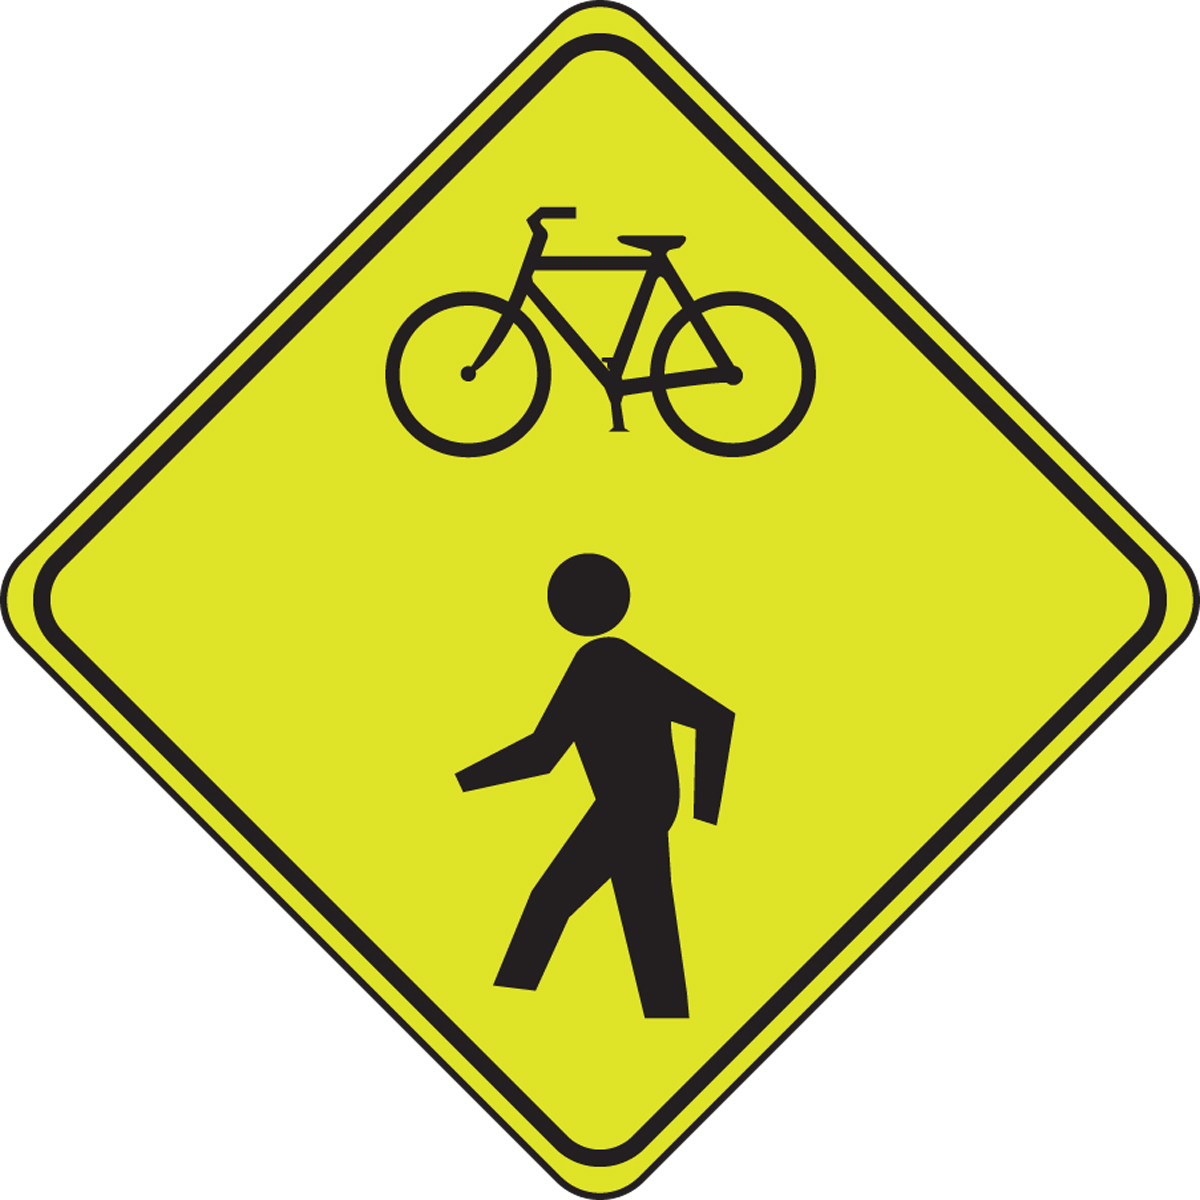 Combined Bicycle/Pedestrian Crossing Fluorescent Yellow-Green Sign